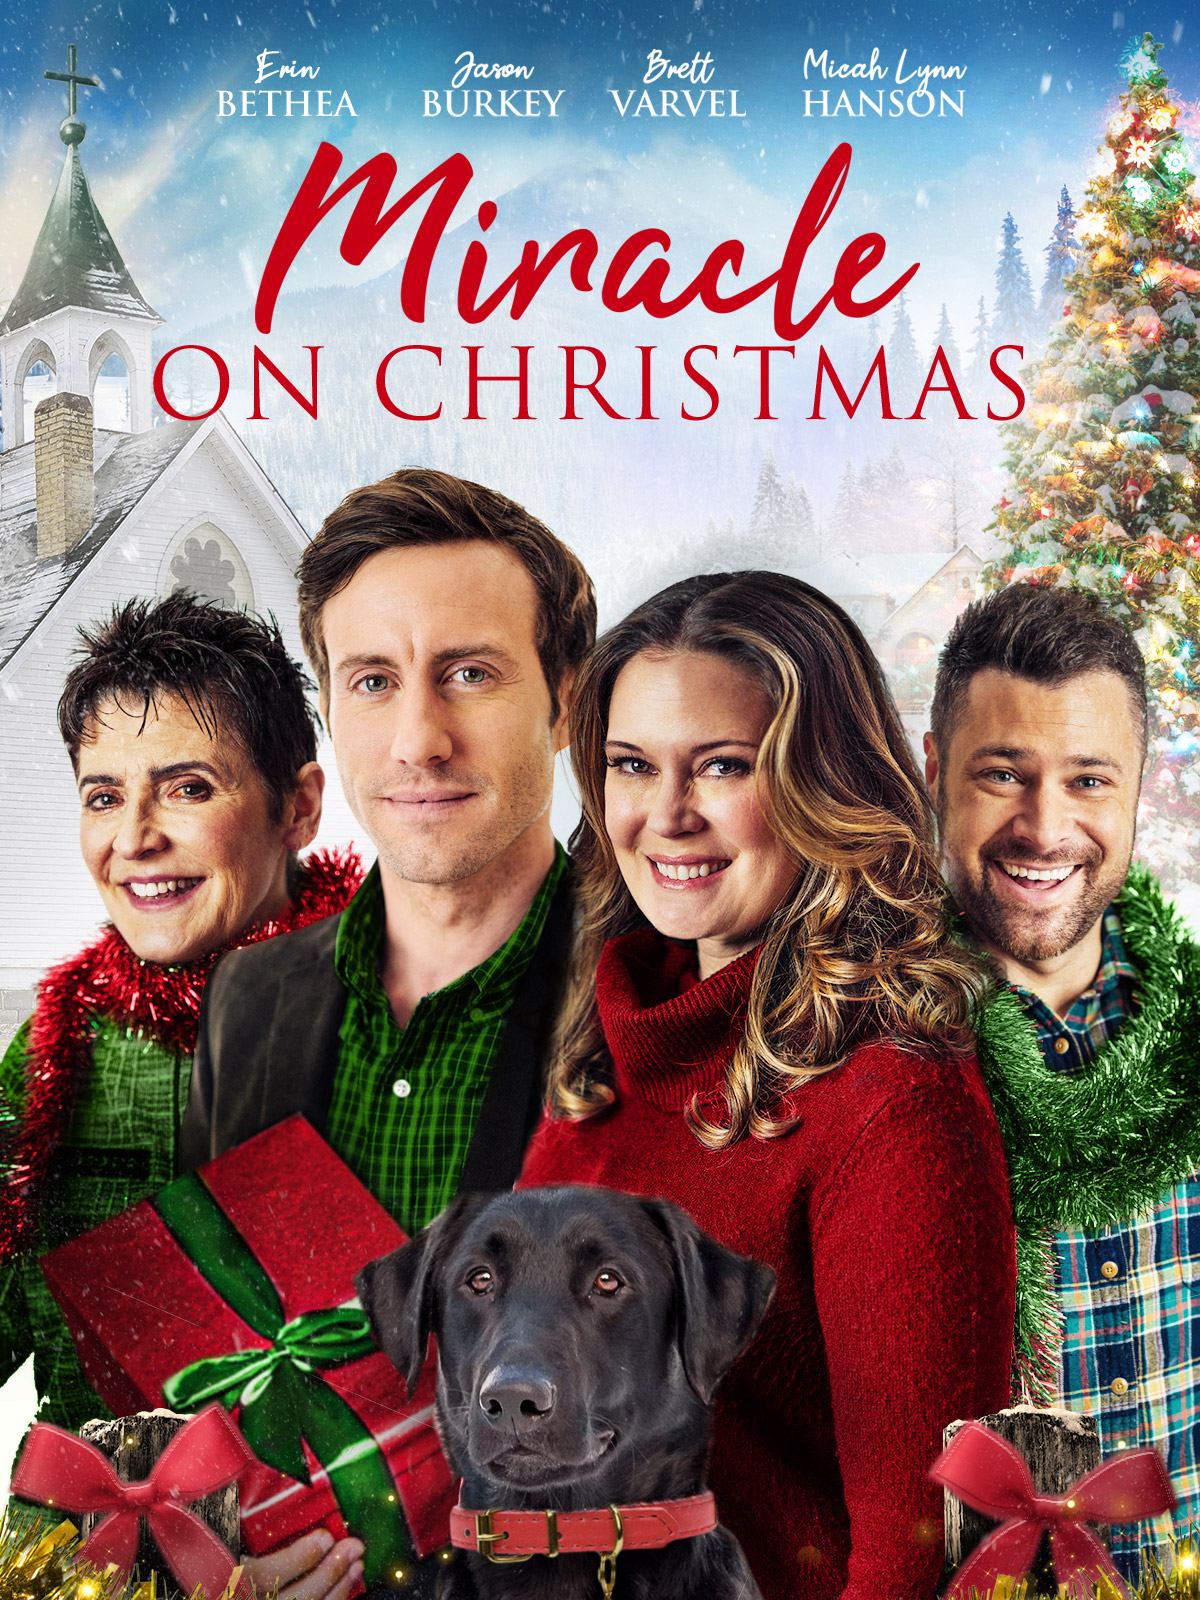 Miracle on Christmas (2020)